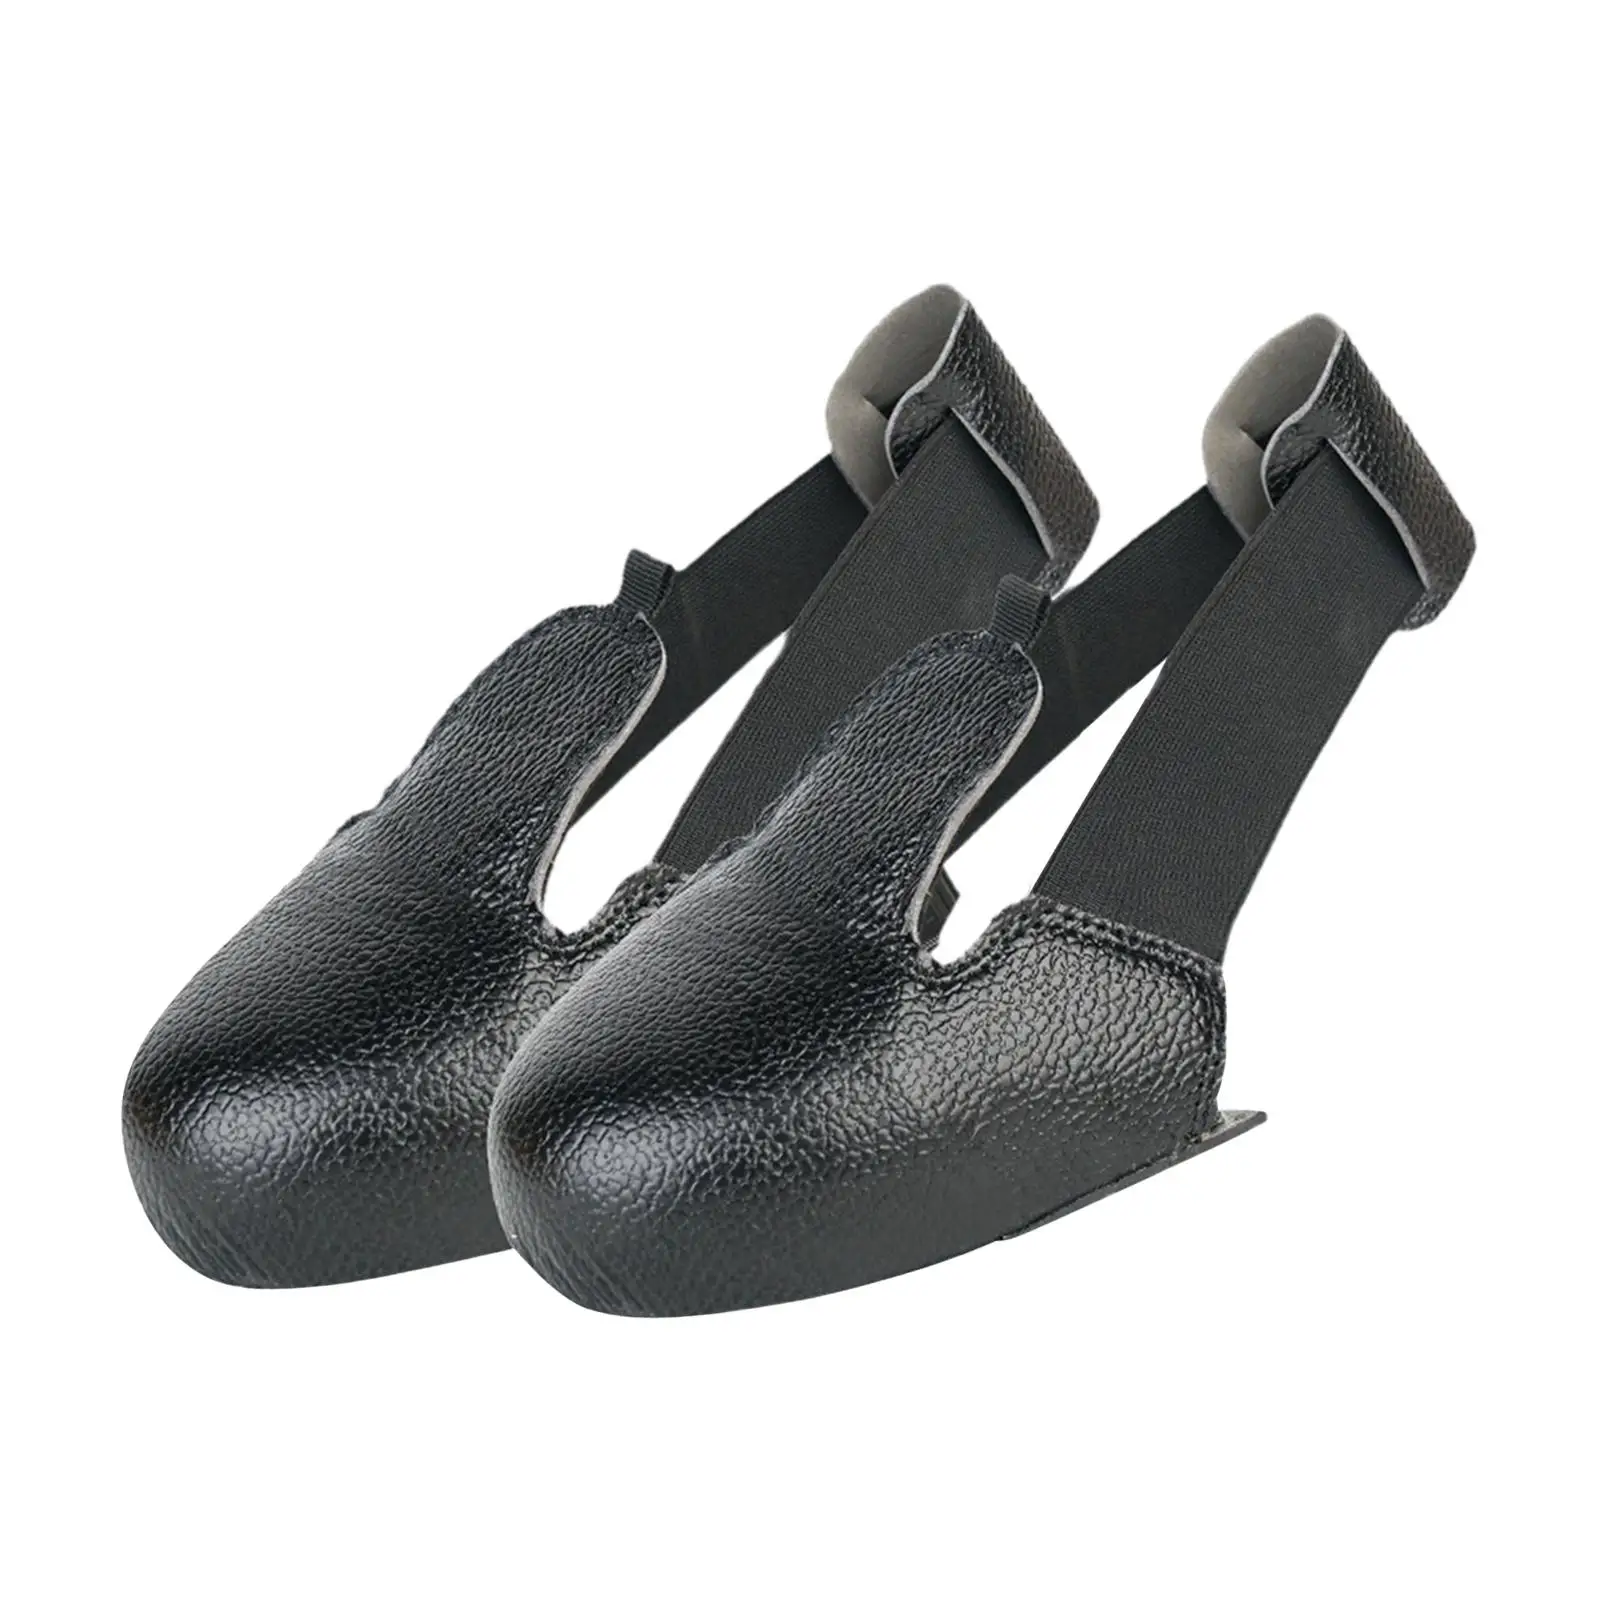 Toe Cap Safety Overshoes Toe Work Shoe Cover Shoe Cap Leather Sole Caps Anti Smashing Leather Shoes Covers